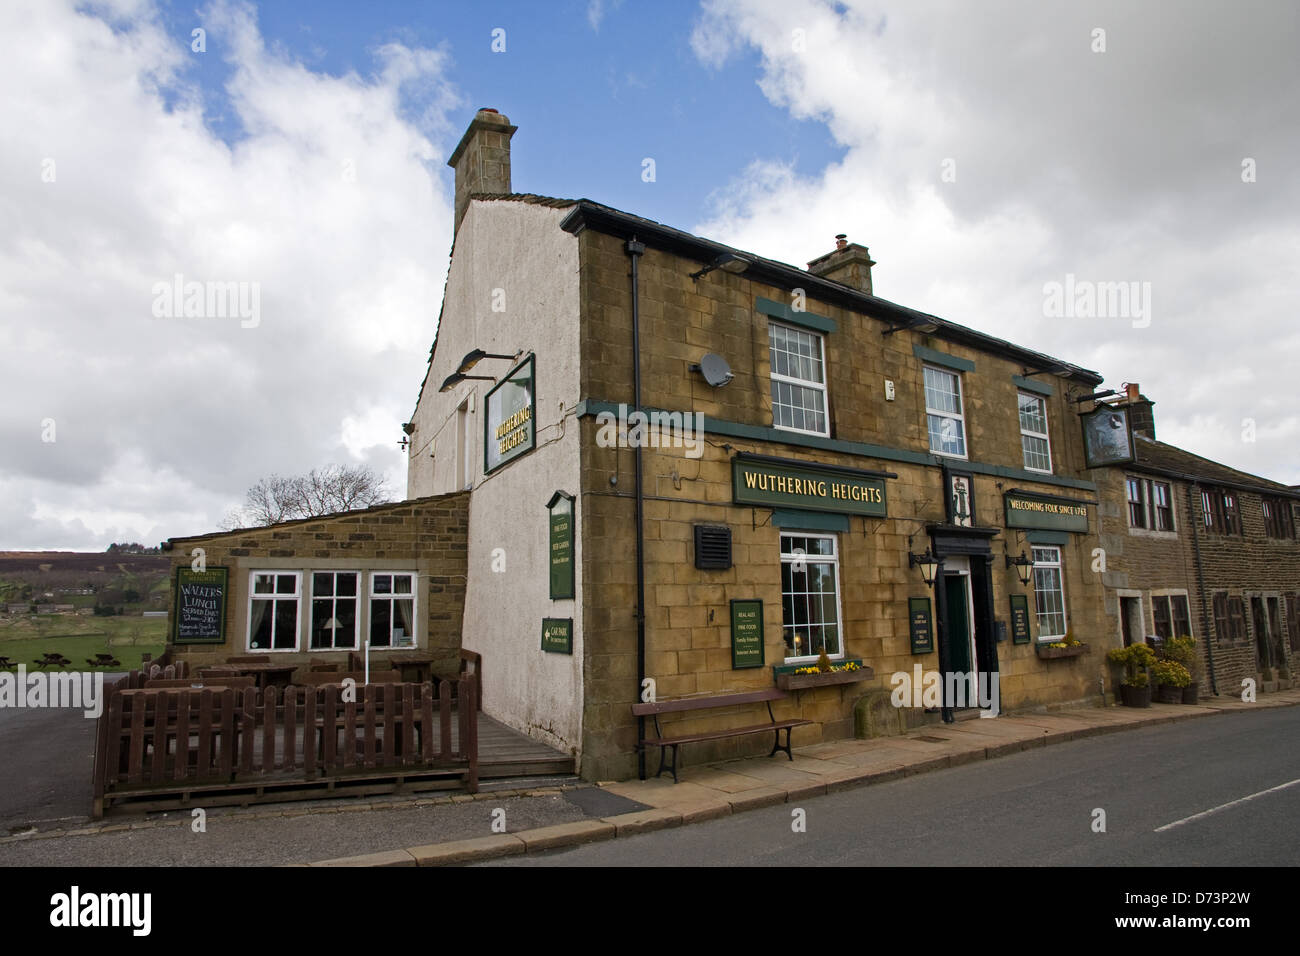 "Wuthering Heights' public house, Stanbury vicino a Hereford Foto Stock